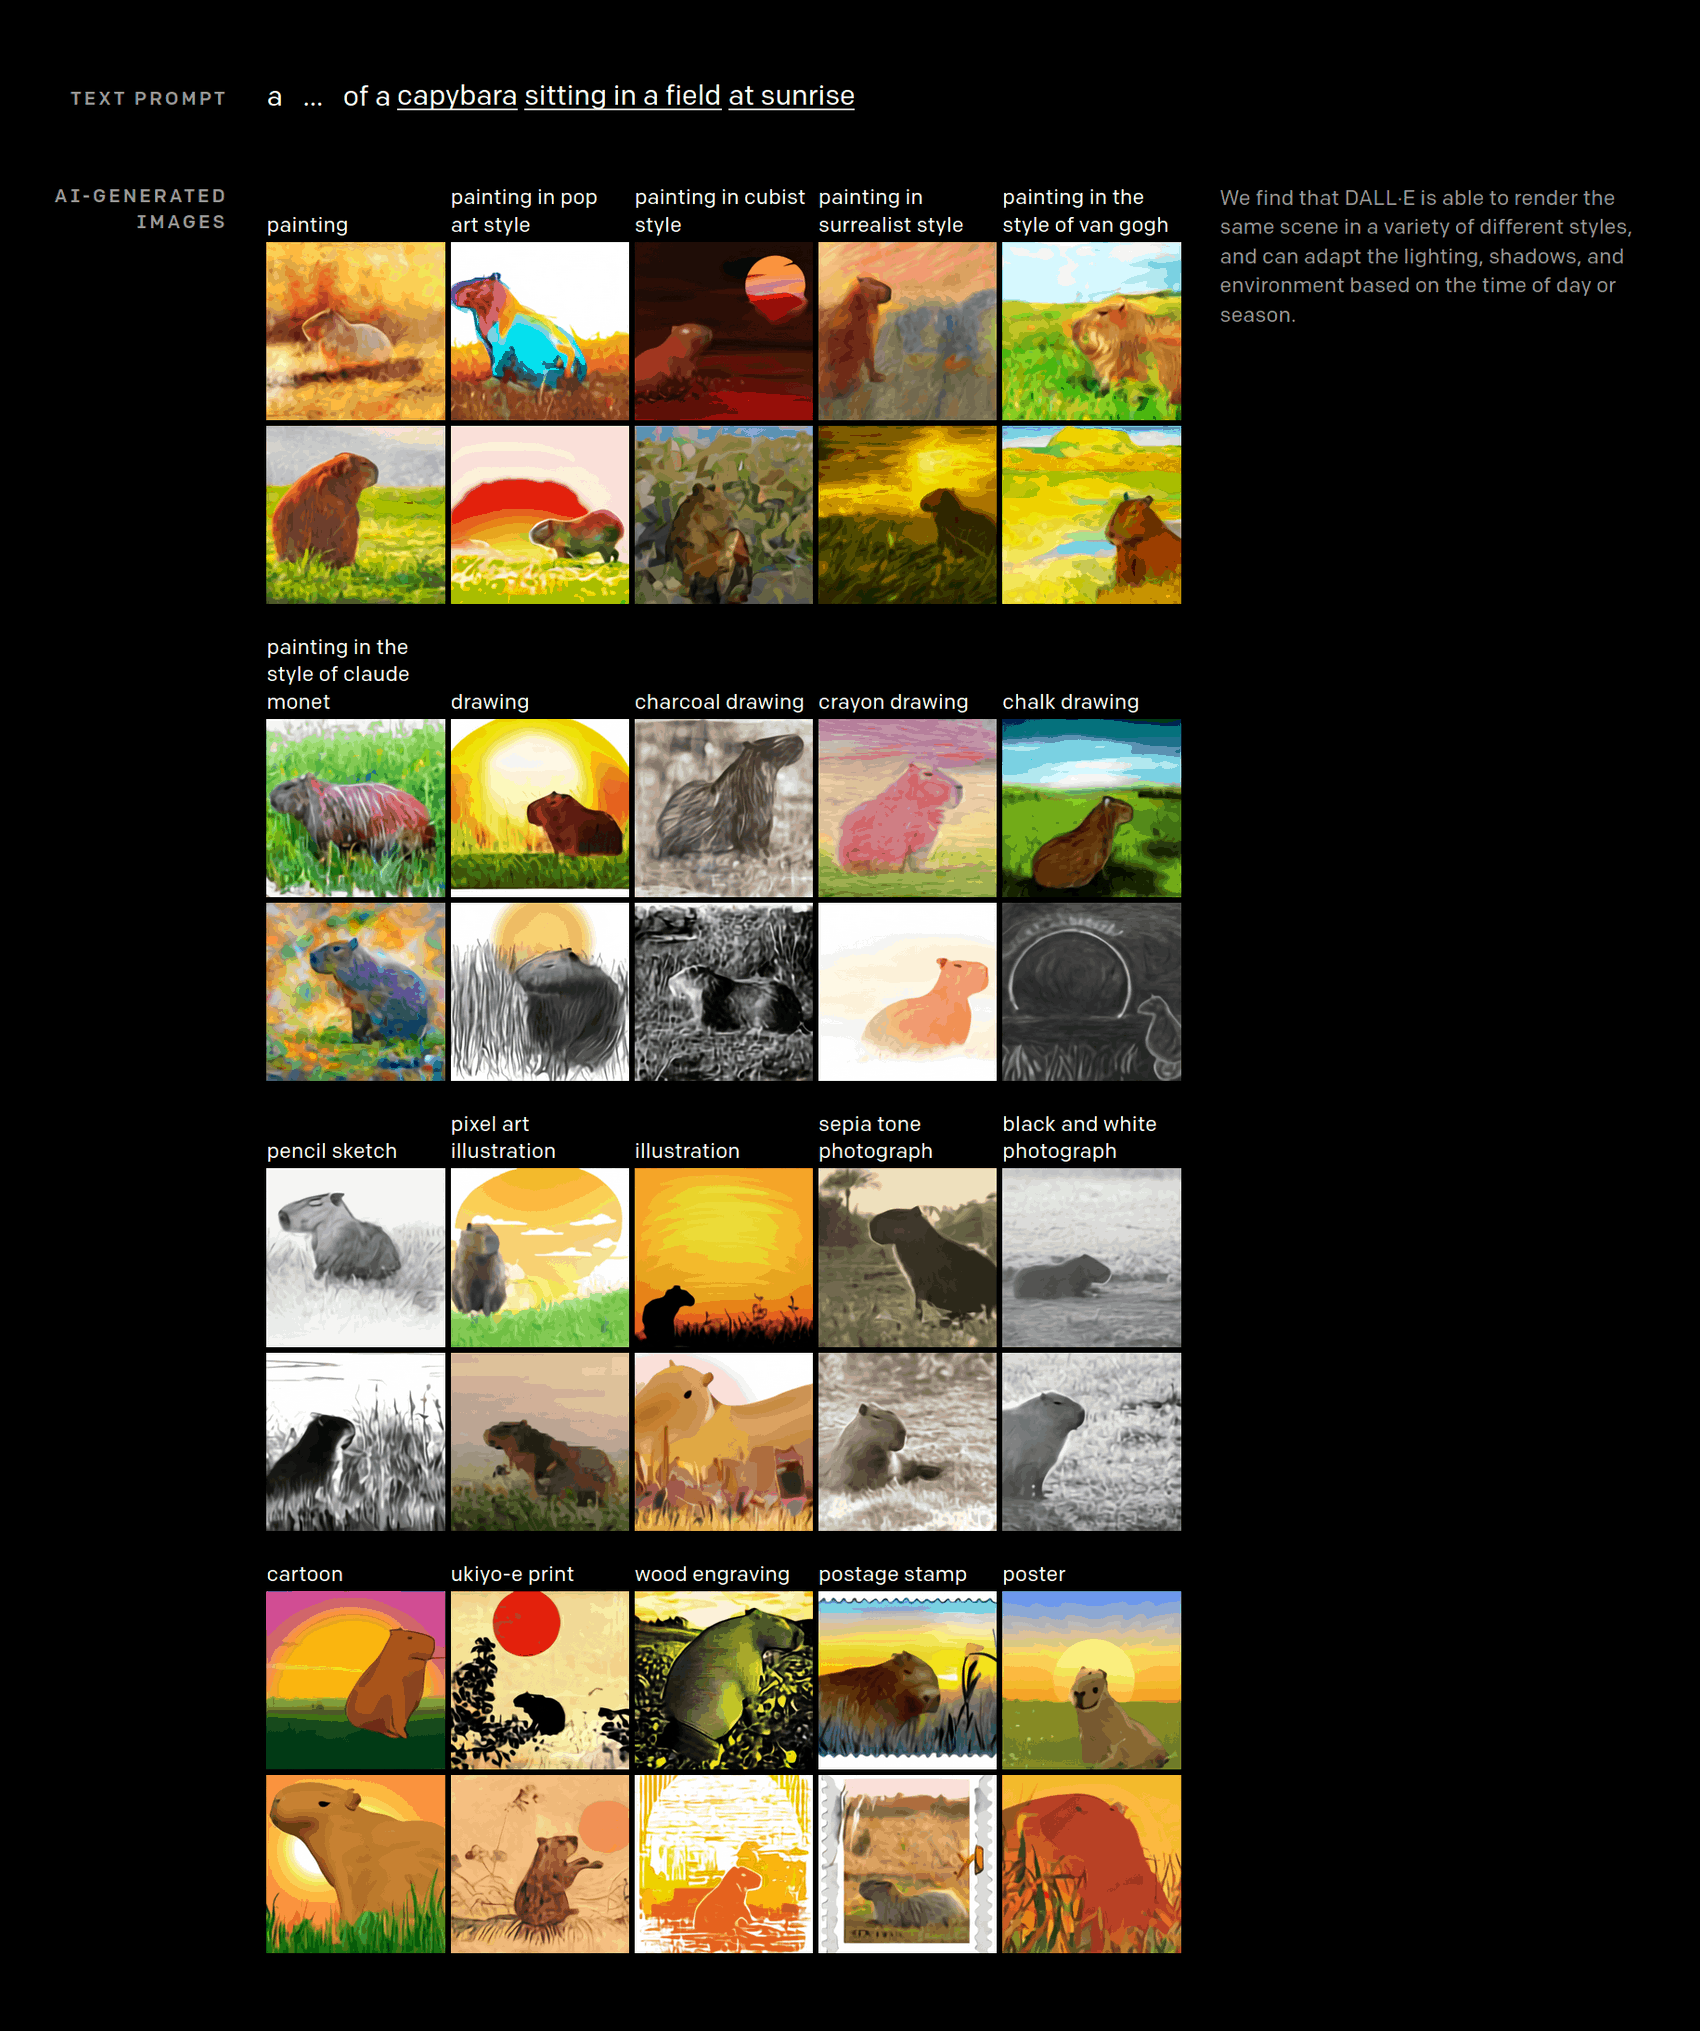 We find that DALL·E is able to render the same scene in a variety of different styles, and can adapt the lighting, shadows, and environment based on the time of day or season: “a … of a capybara sitting in a field at sunrise”